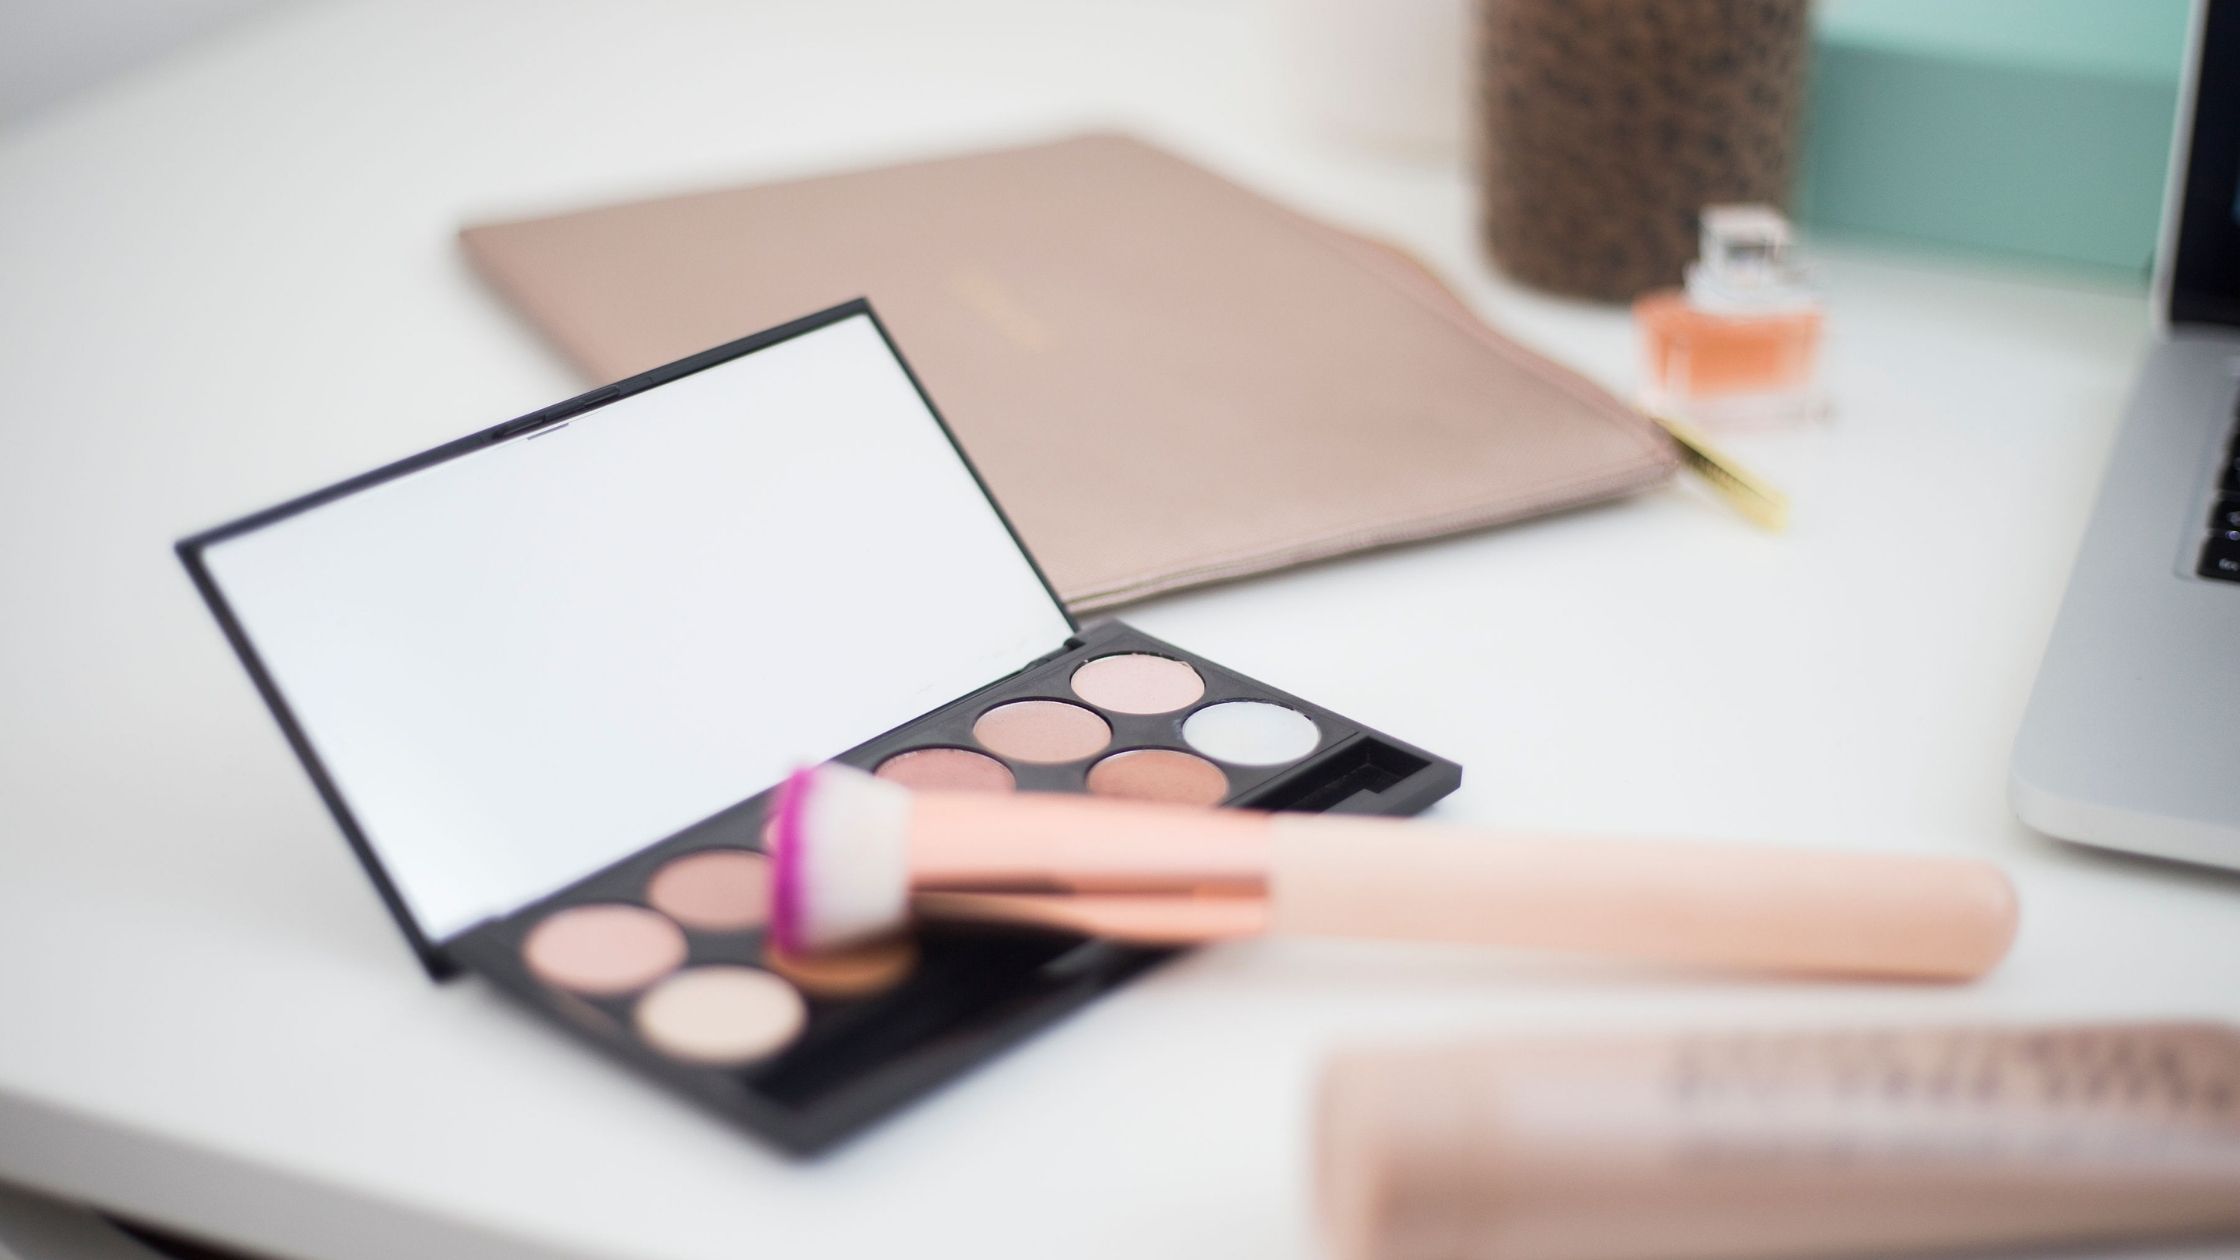 eye shadow palette and makeup brush on a white table